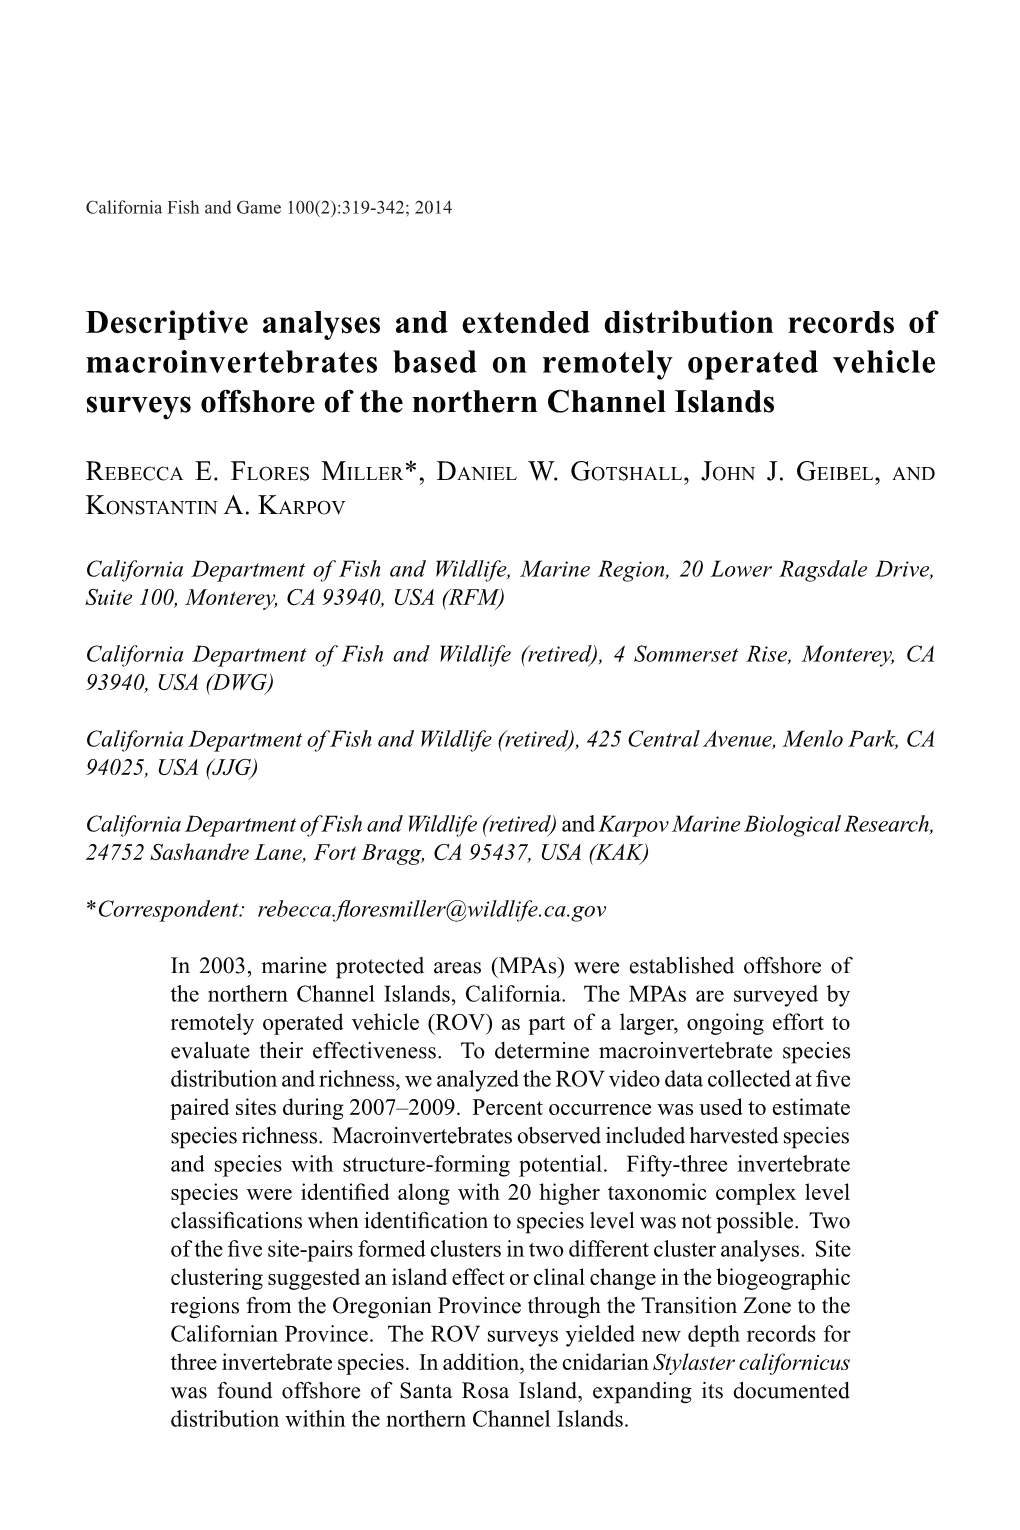 Descriptive Analyses and Extended Distribution Records of Macroinvertebrates Based on Remotely Operated Vehicle Surveys Offshore of the Northern Channel Islands